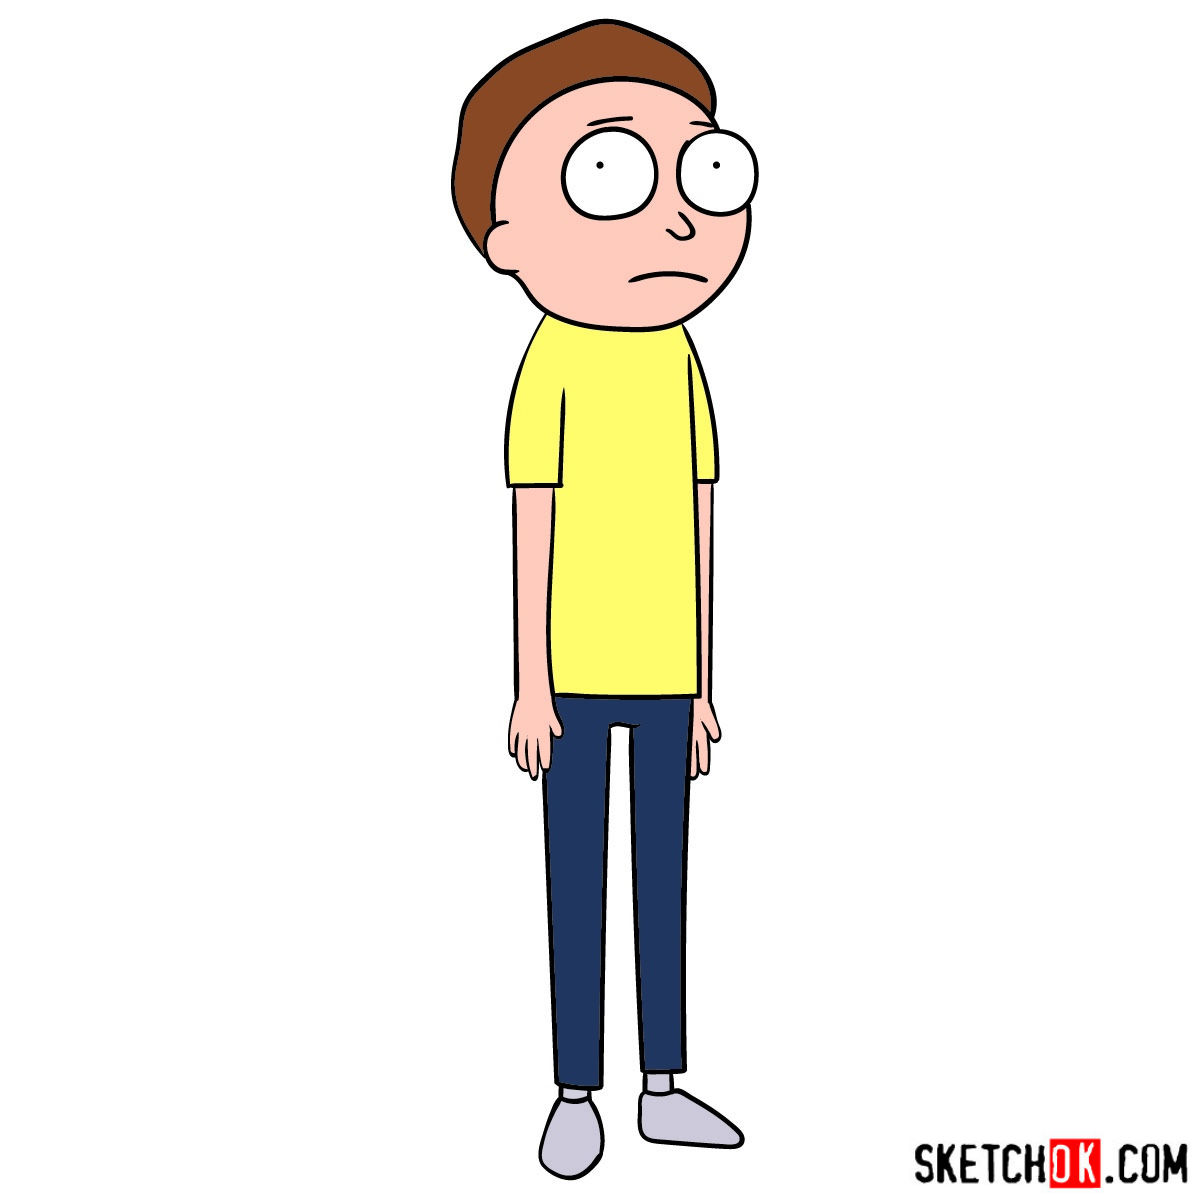 How to draw Morty Smith - Sketchok easy drawing guides.